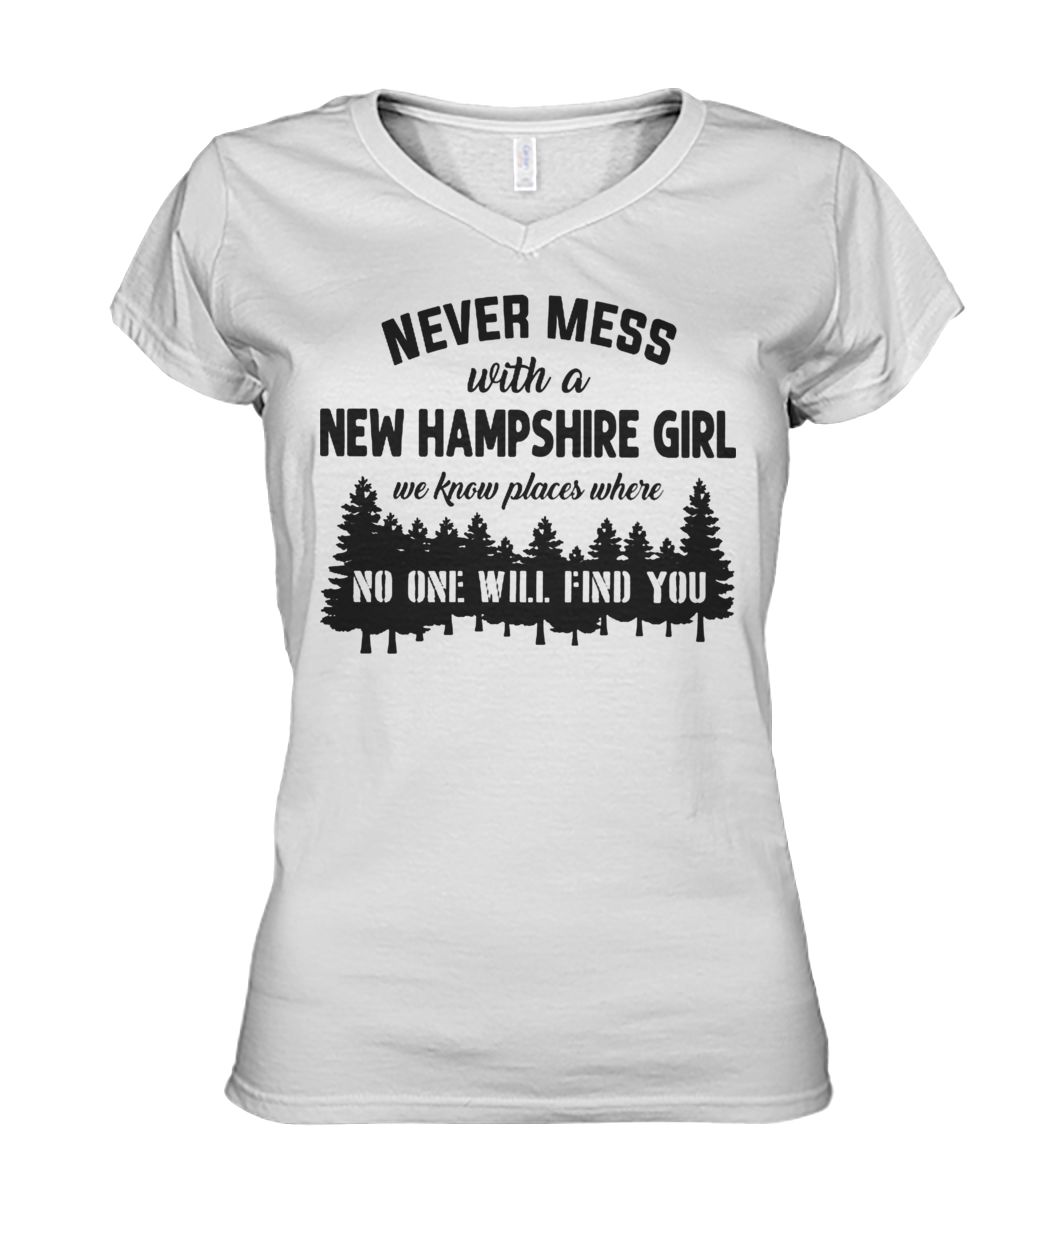 Never mess with a new hampshire girl we know places where no one will find you women's v-neck